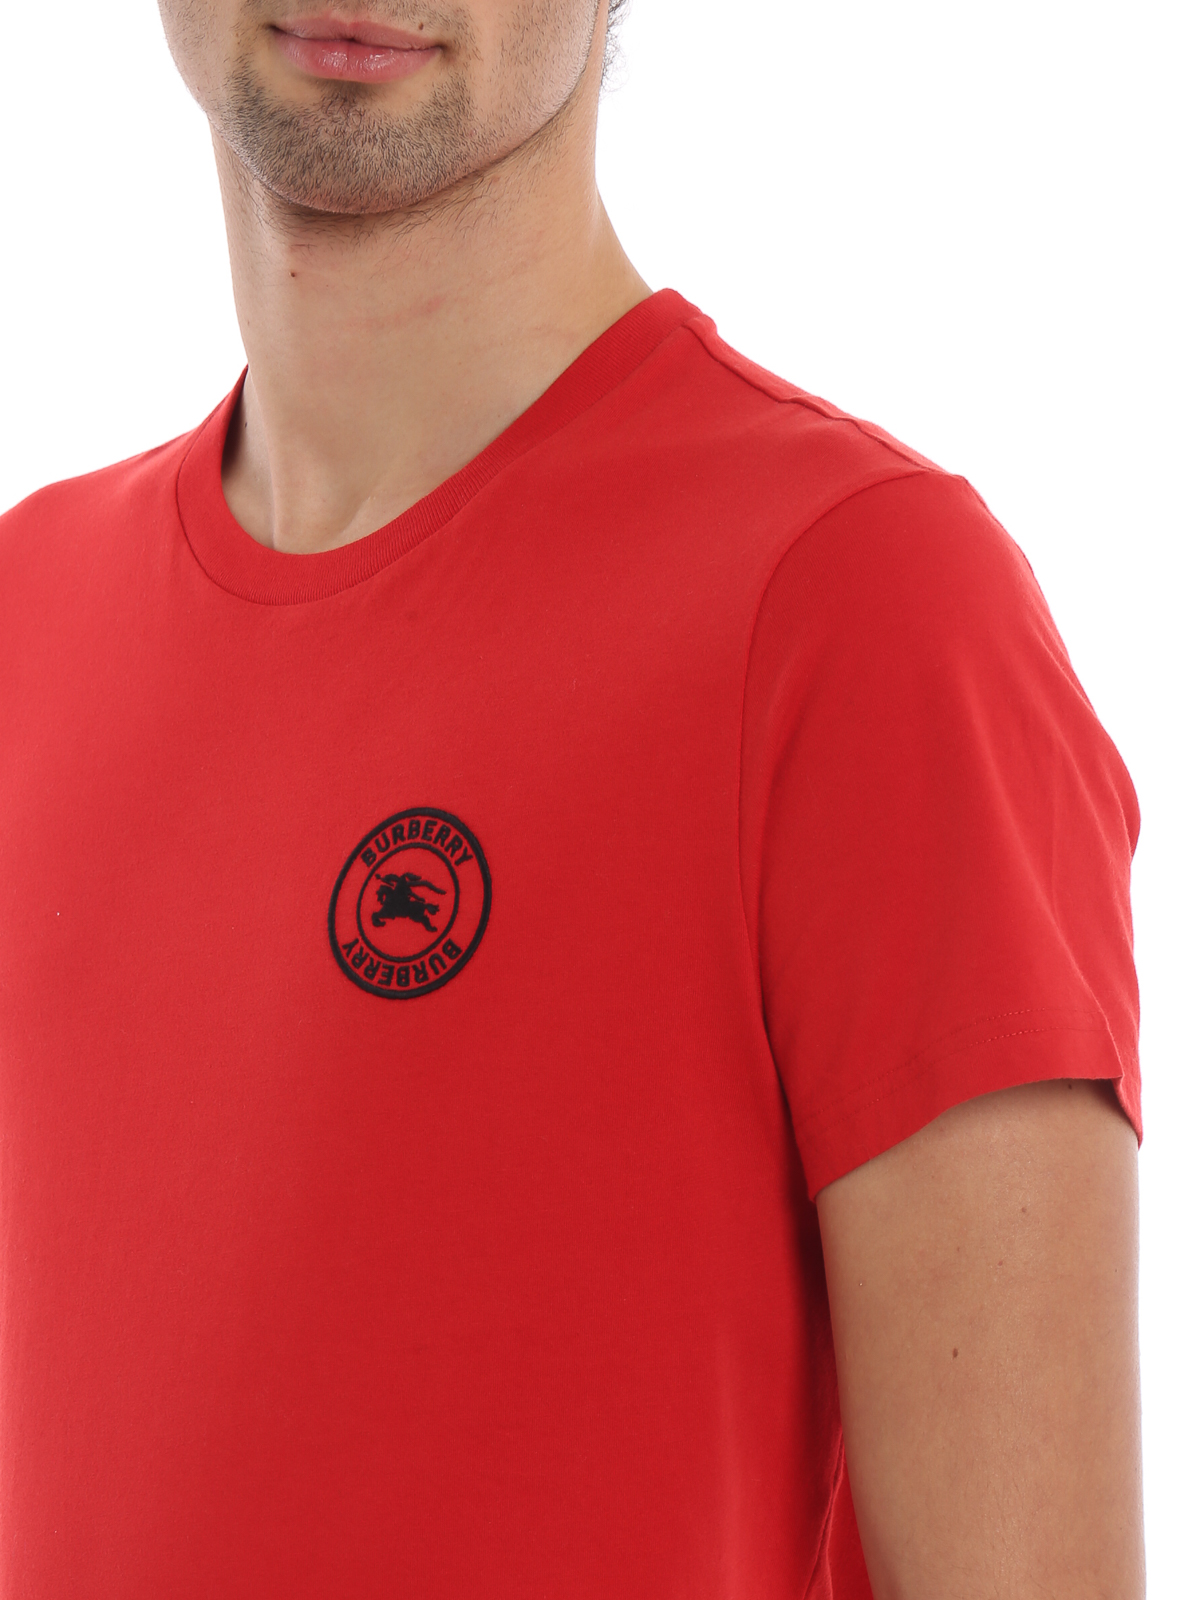 buy red t shirt online